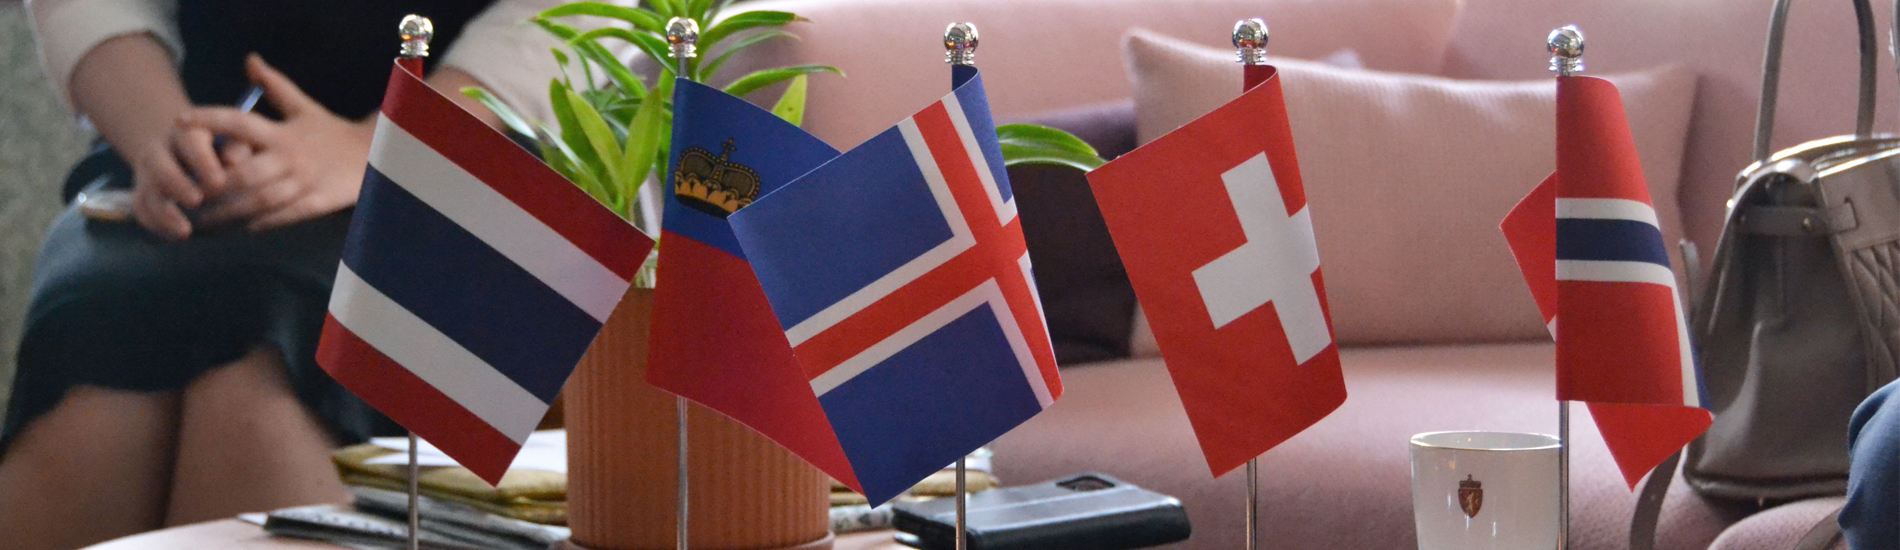 Flags of European Free Trade Association (EFTA) in FTA discussions